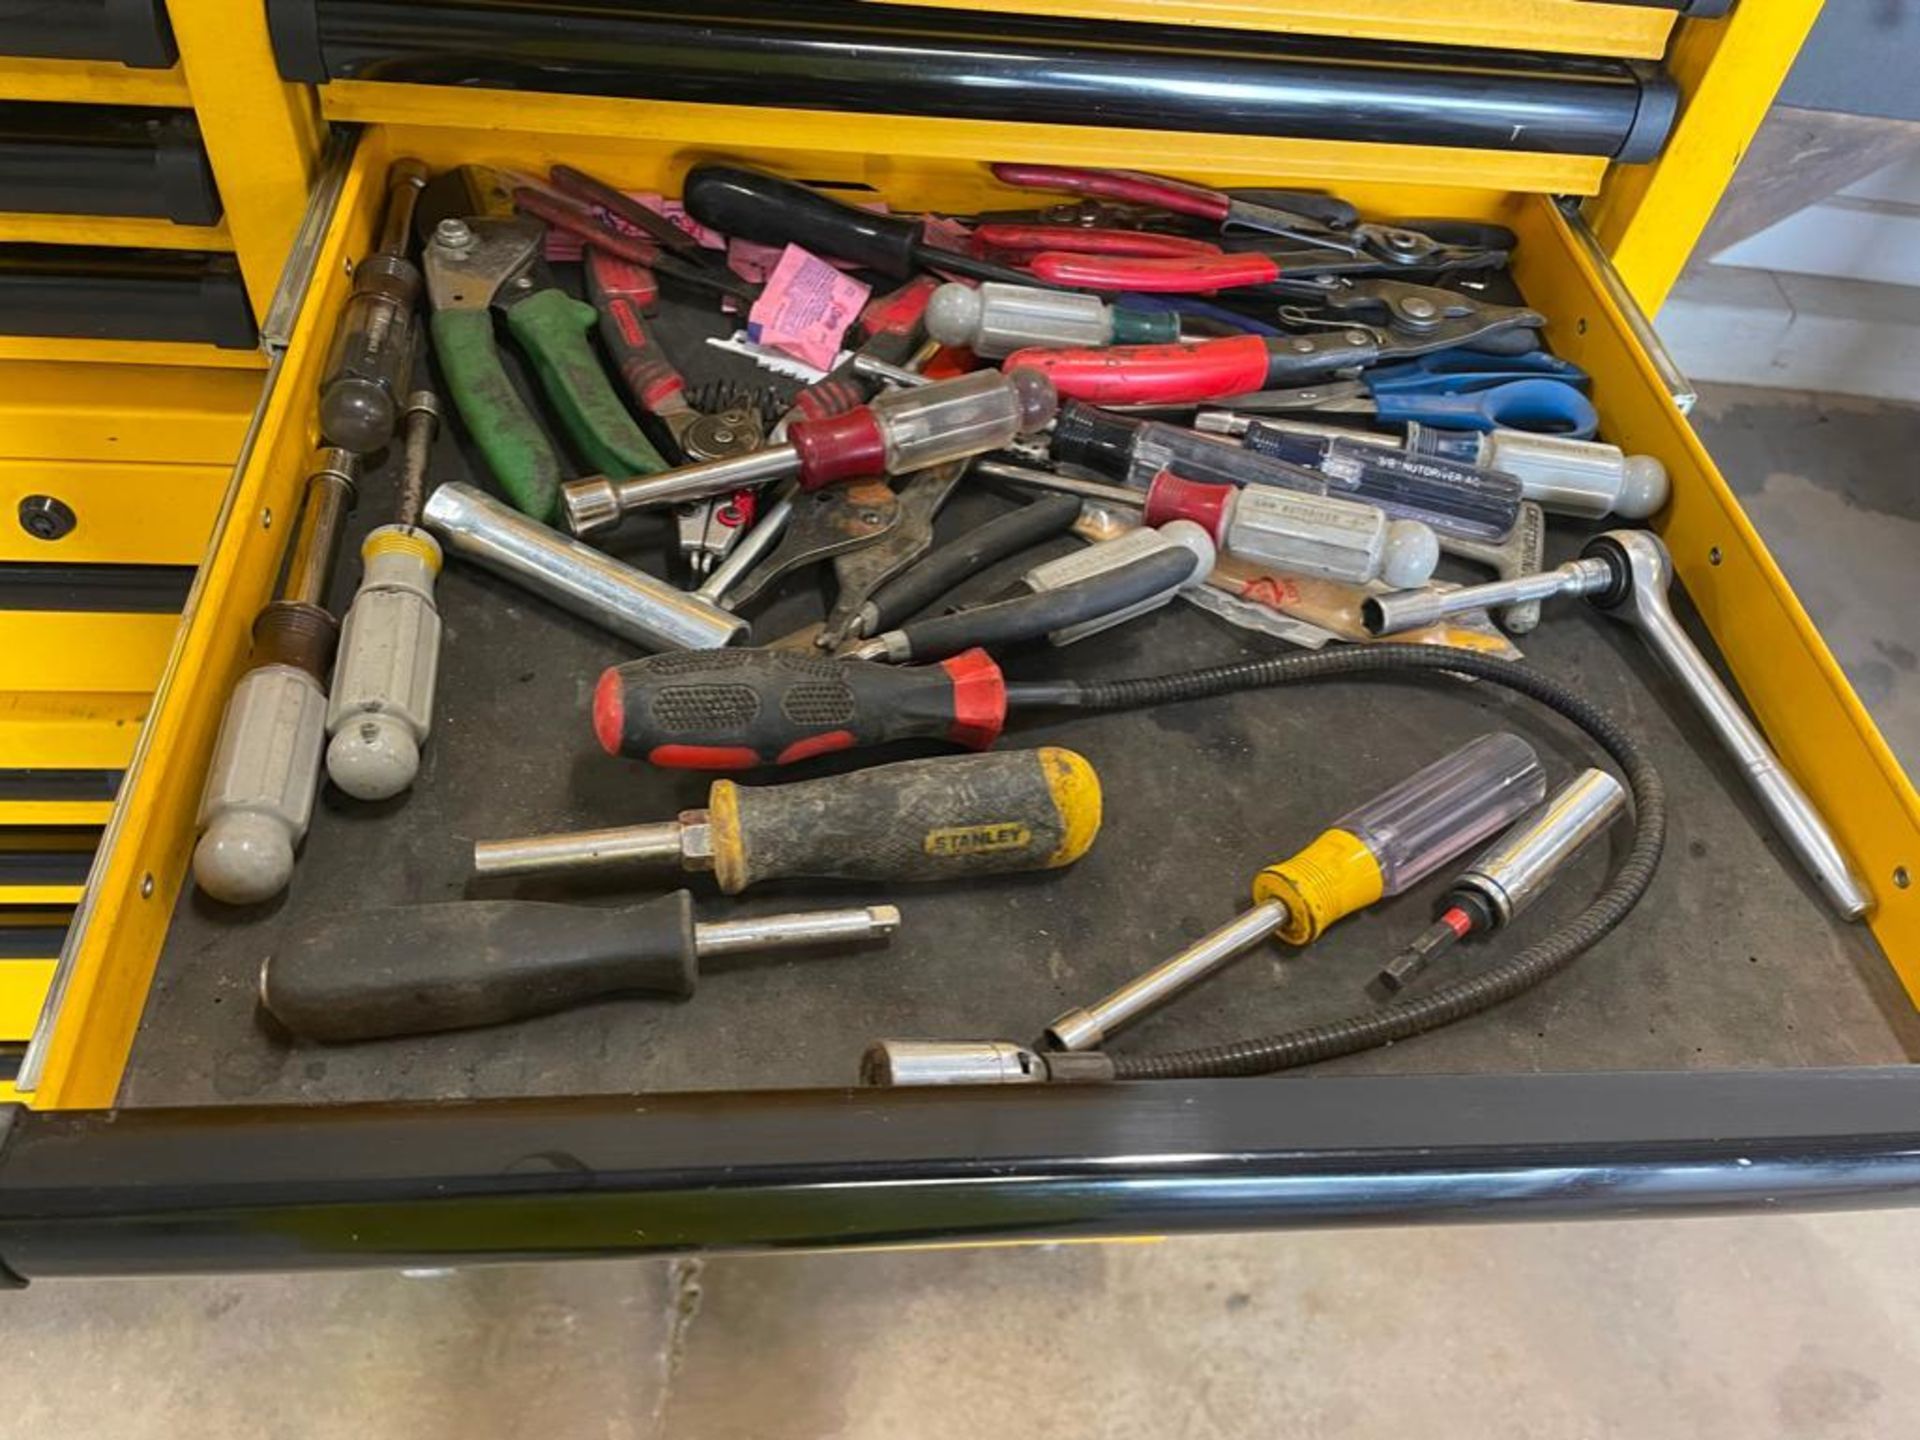 DeWalt Mechanics Tool Box with Contents, Wrenches, Sockets, Plyers, Pipe Wrench, Screwdrivers, etc. - Image 13 of 24